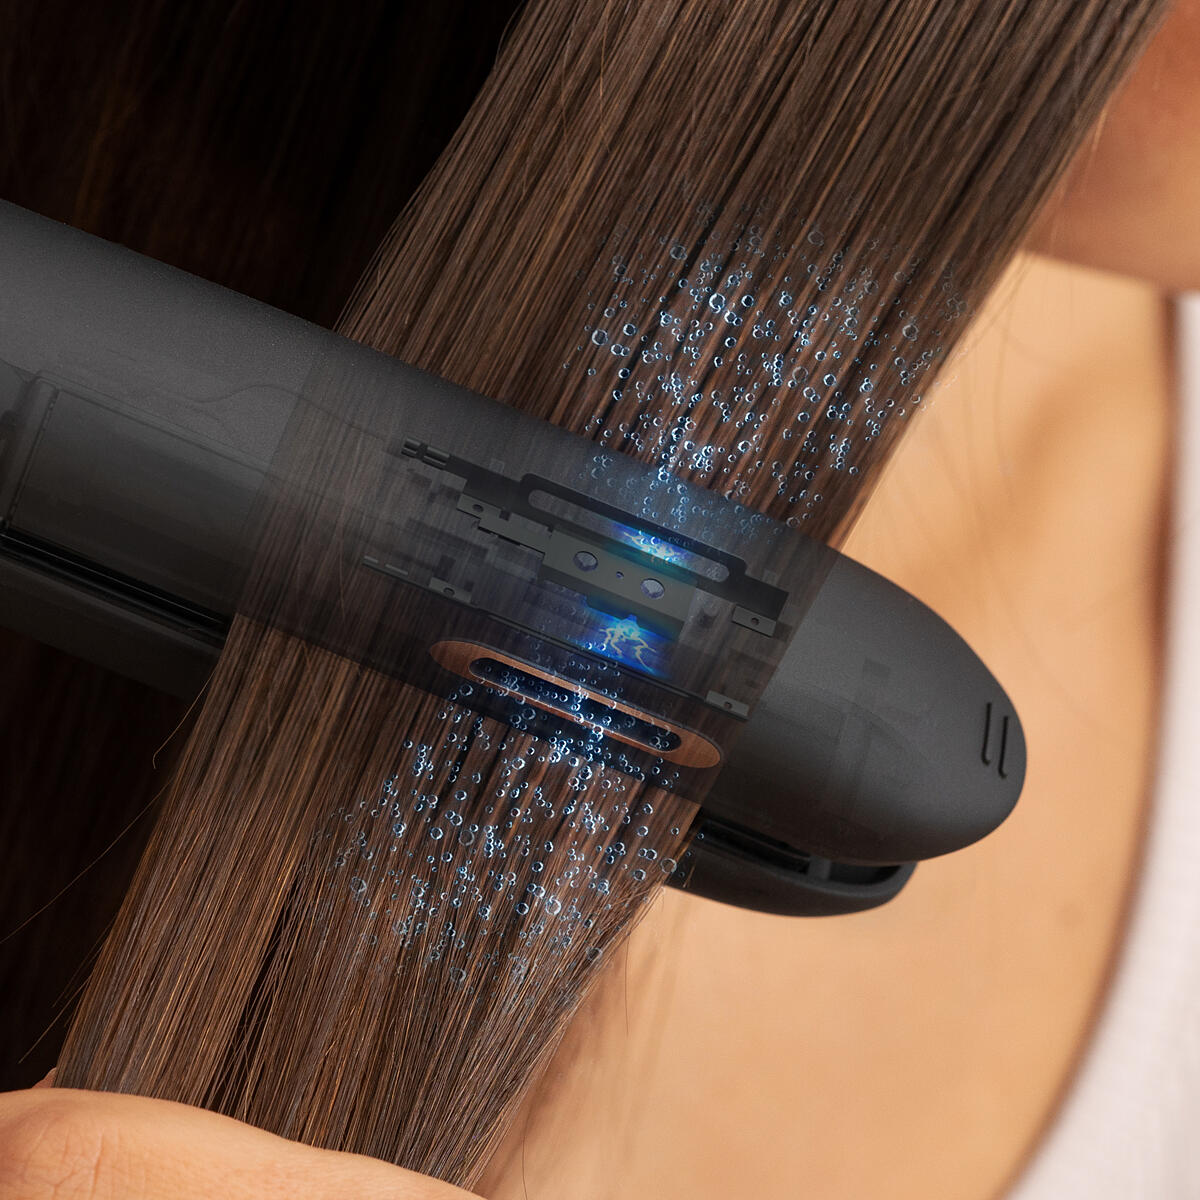 Enrich your hair with nanoe™ technology